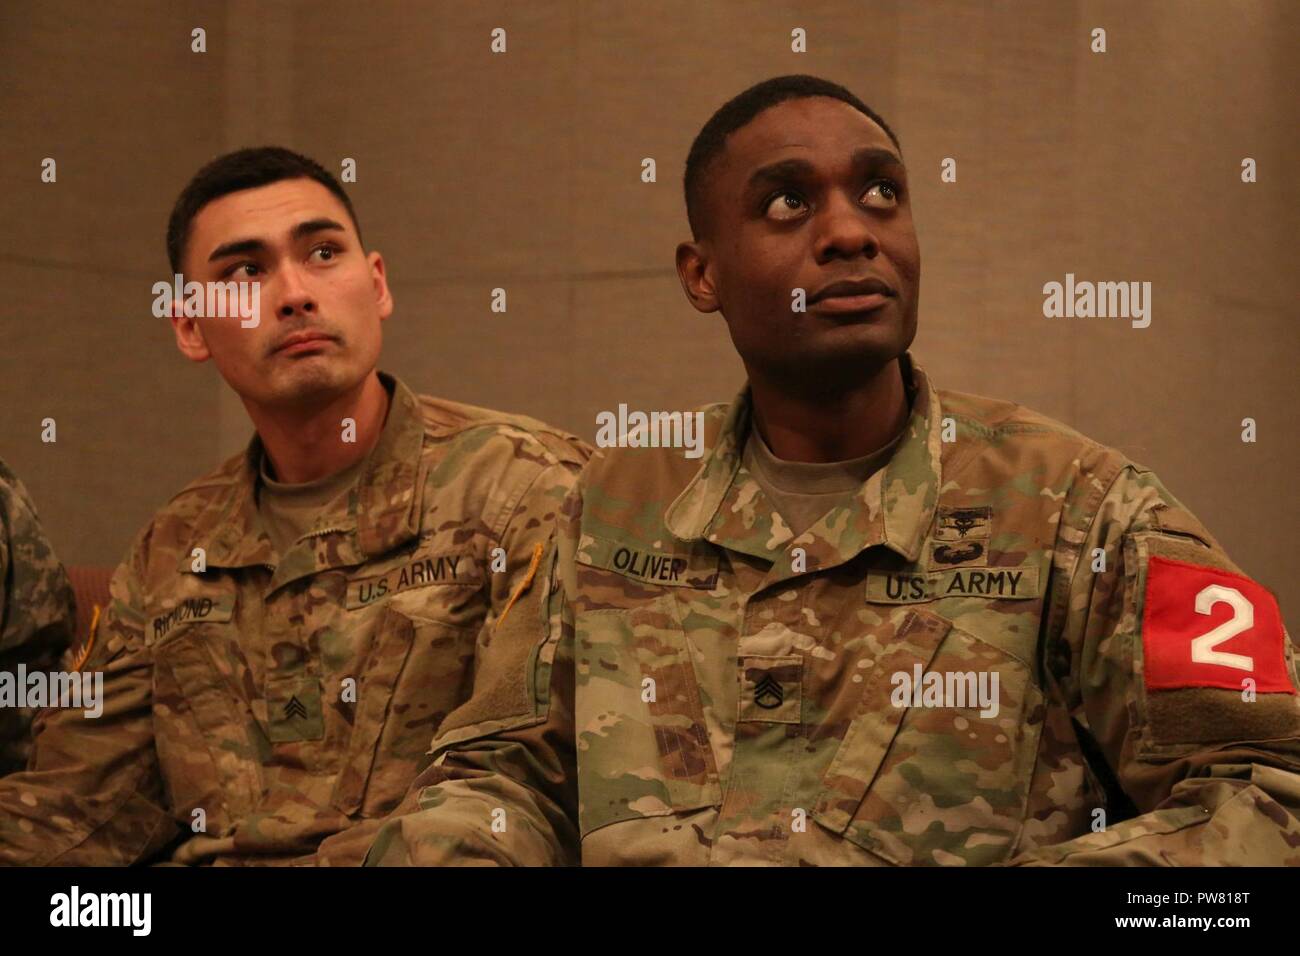 U.S. Army Sgt. Kevin Richmond and Staff Sgt. Brandon Oliver, assigned to the Martin Army Community Hospital, listen to speakers during the 2017 Best Medic Competition Award Ceremony at Fort Bragg, N.C., Sept. 20, 2017. The competition tested the physical and mental toughness, as well as the technical competence, of each medic to identify the team moving forward to represent the region at the next level of the competition. Stock Photo